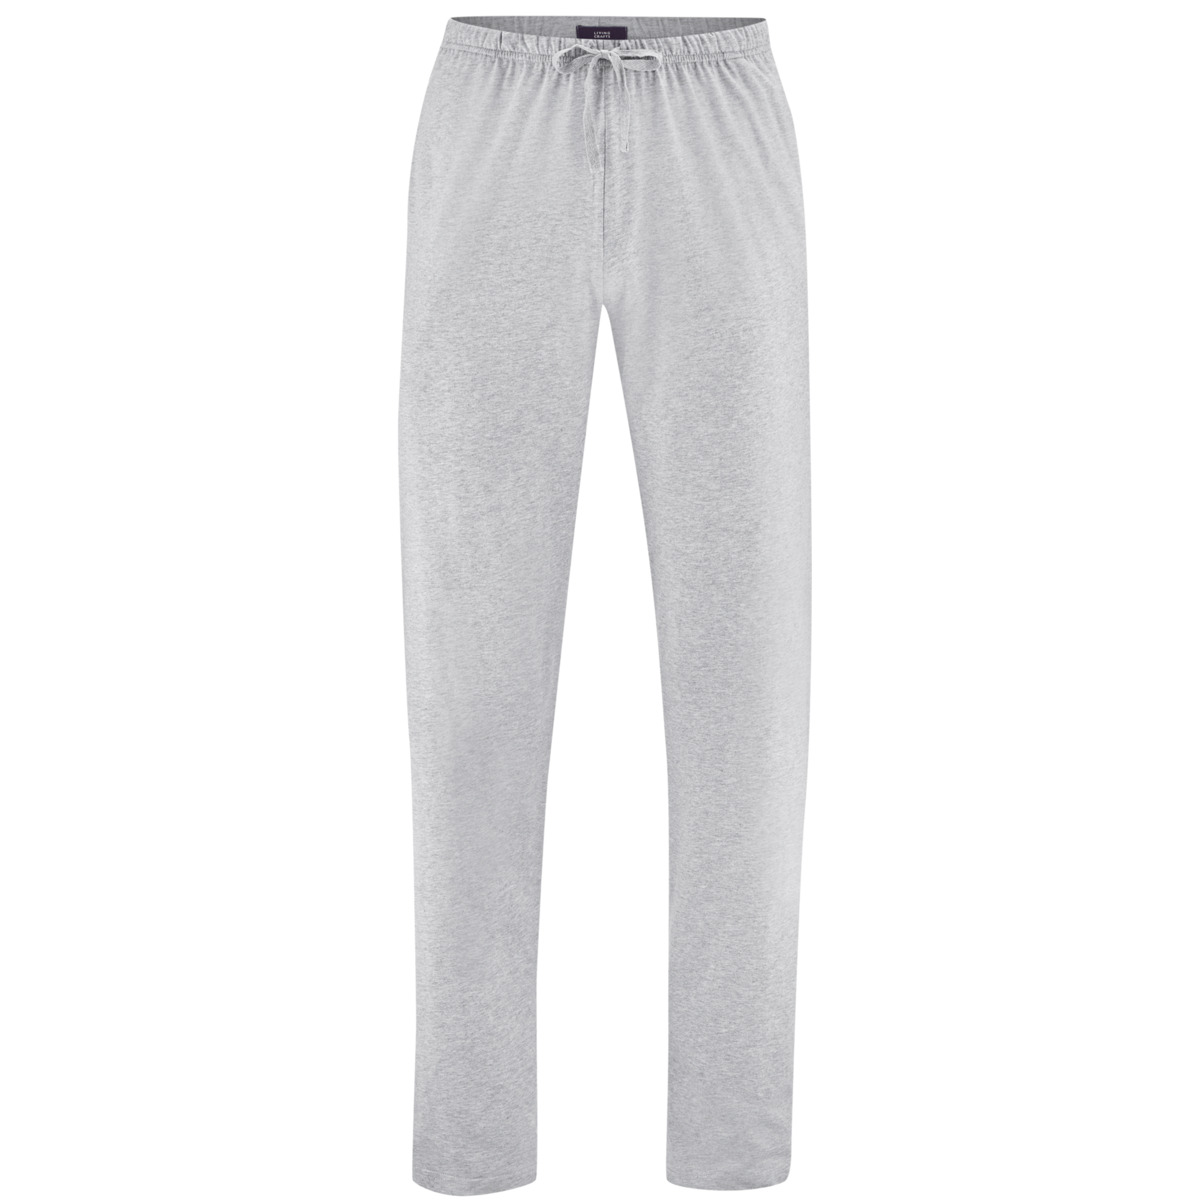 Grey Casual trousers, 